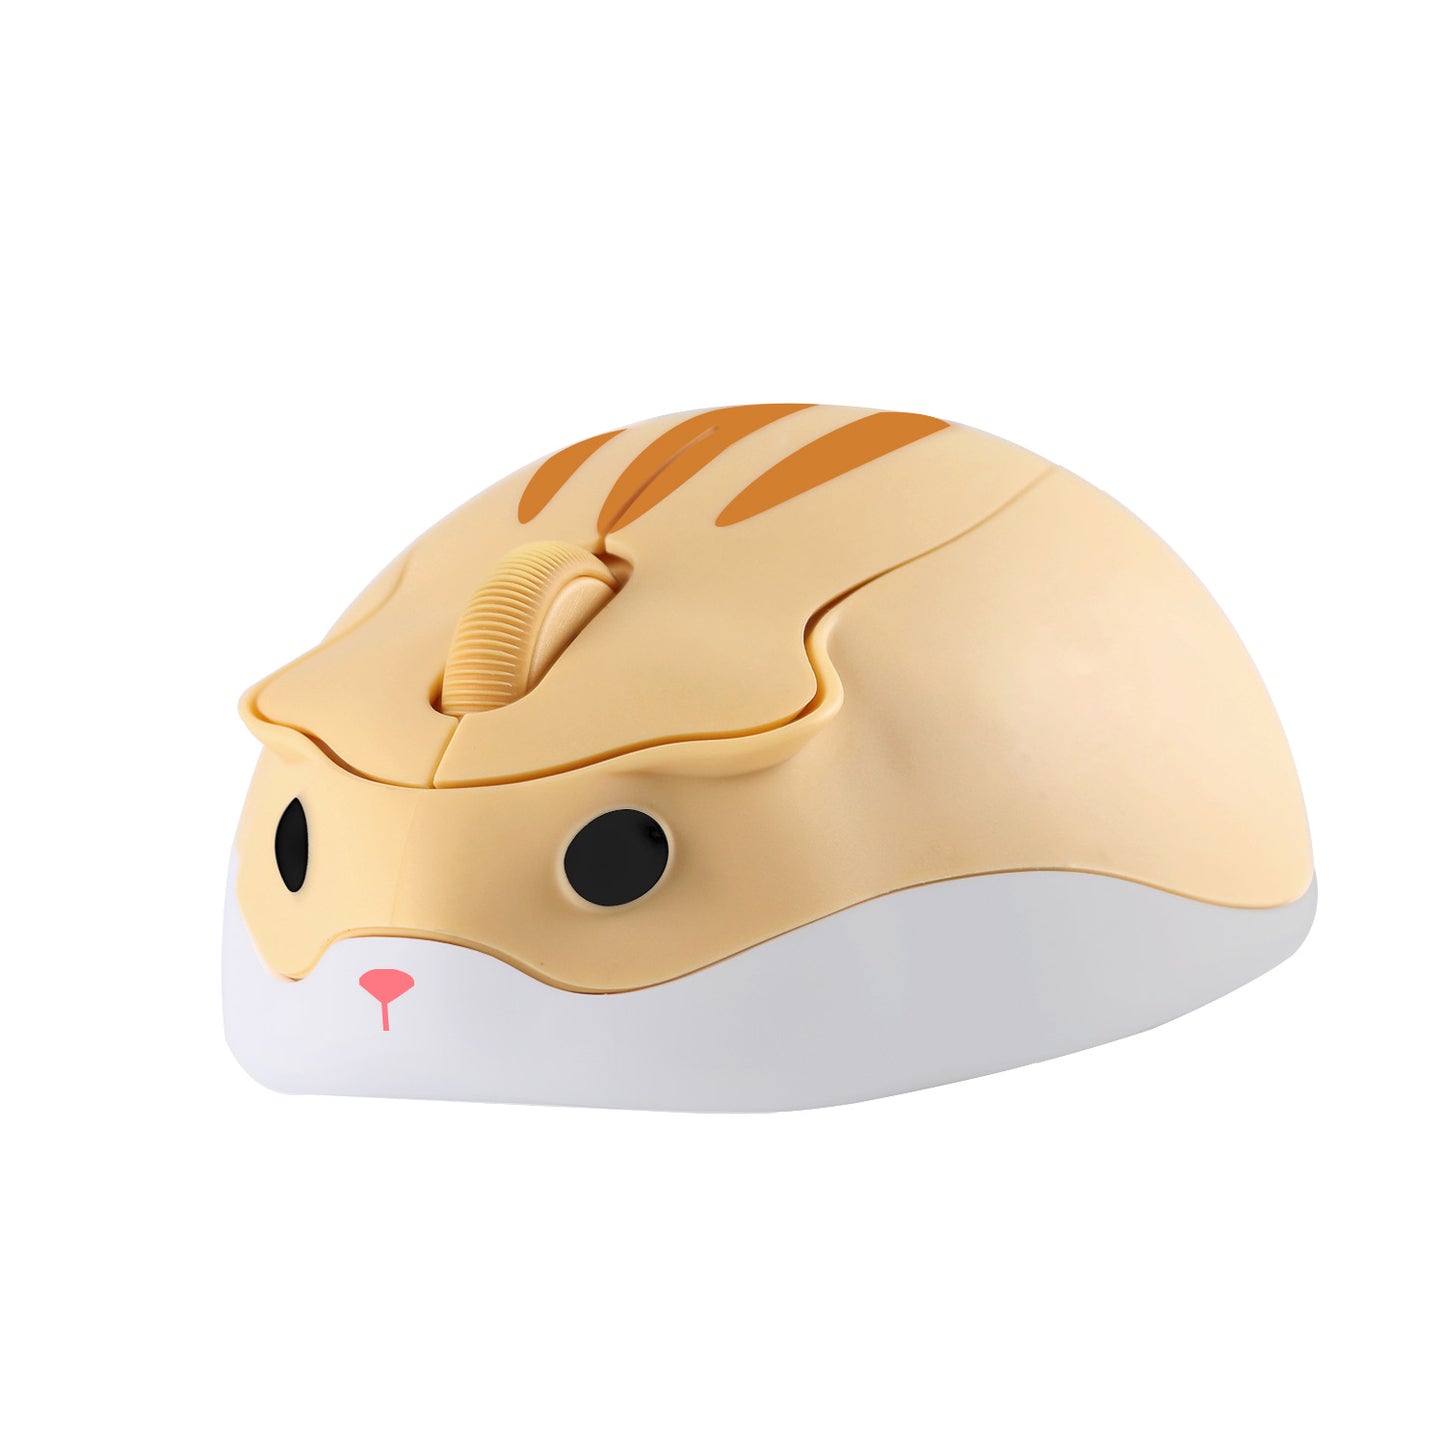 Hamster Computer Mouse